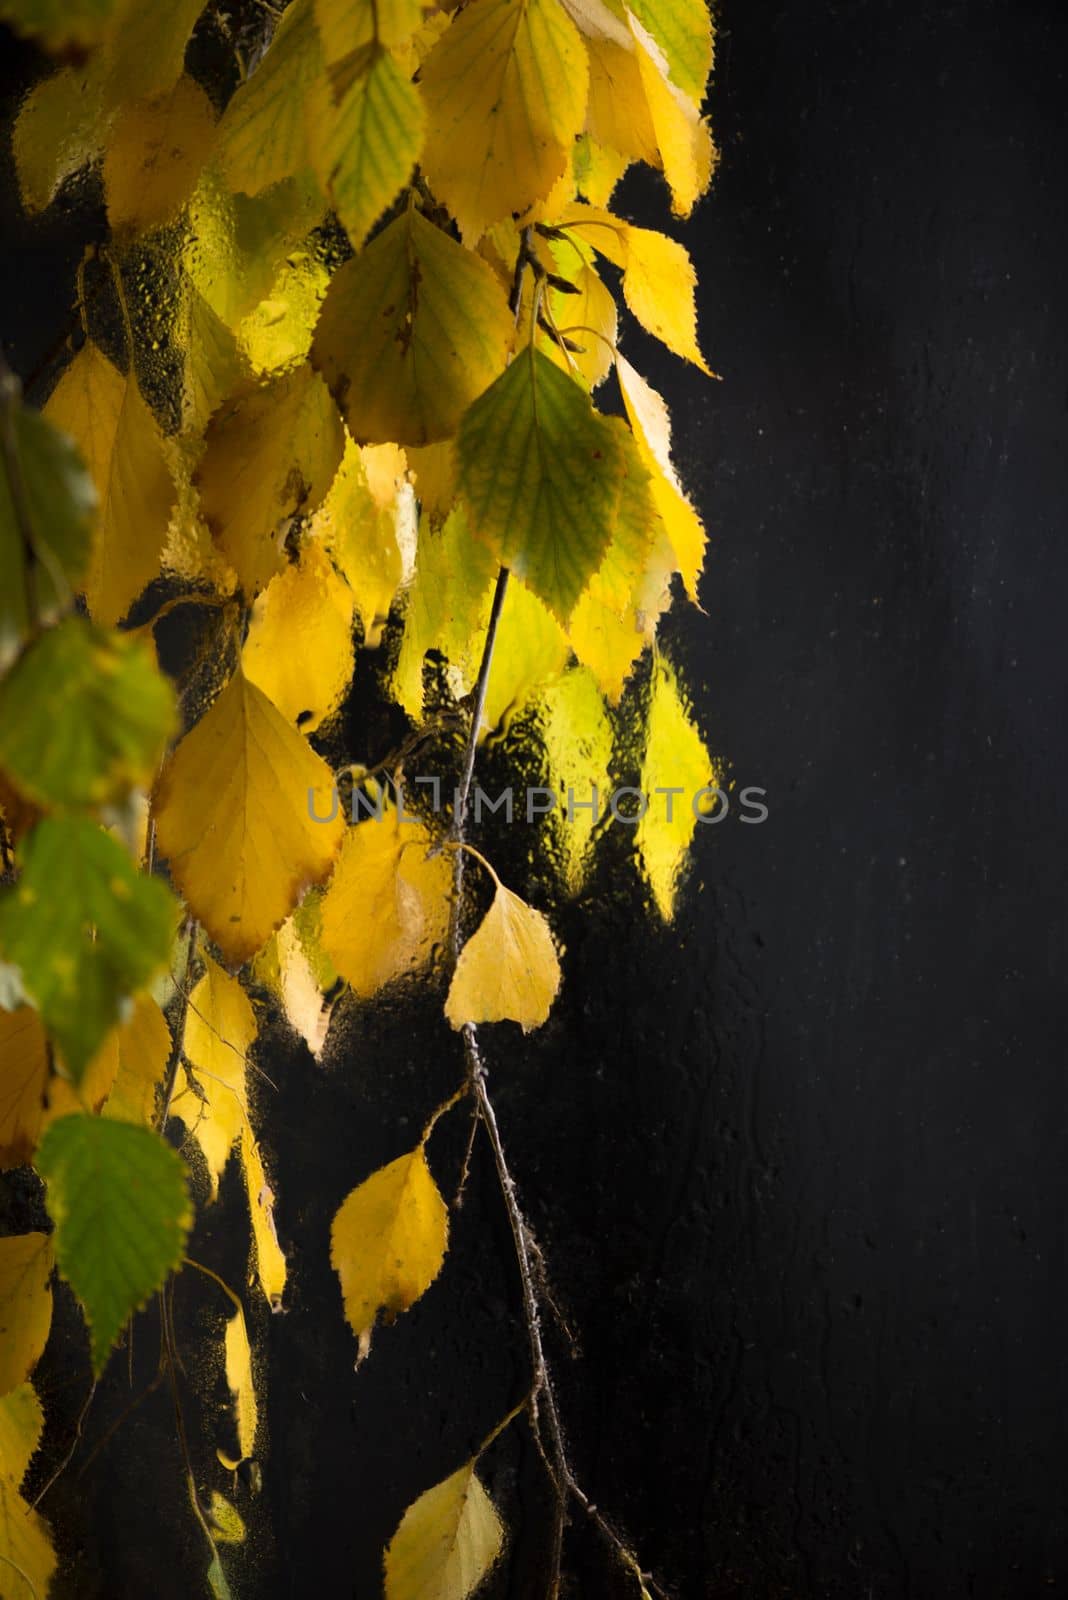 Autumn form. Yellowed birch branches through a wet rainy window. Branch with the turned yellow leaves of a birch by aprilphoto